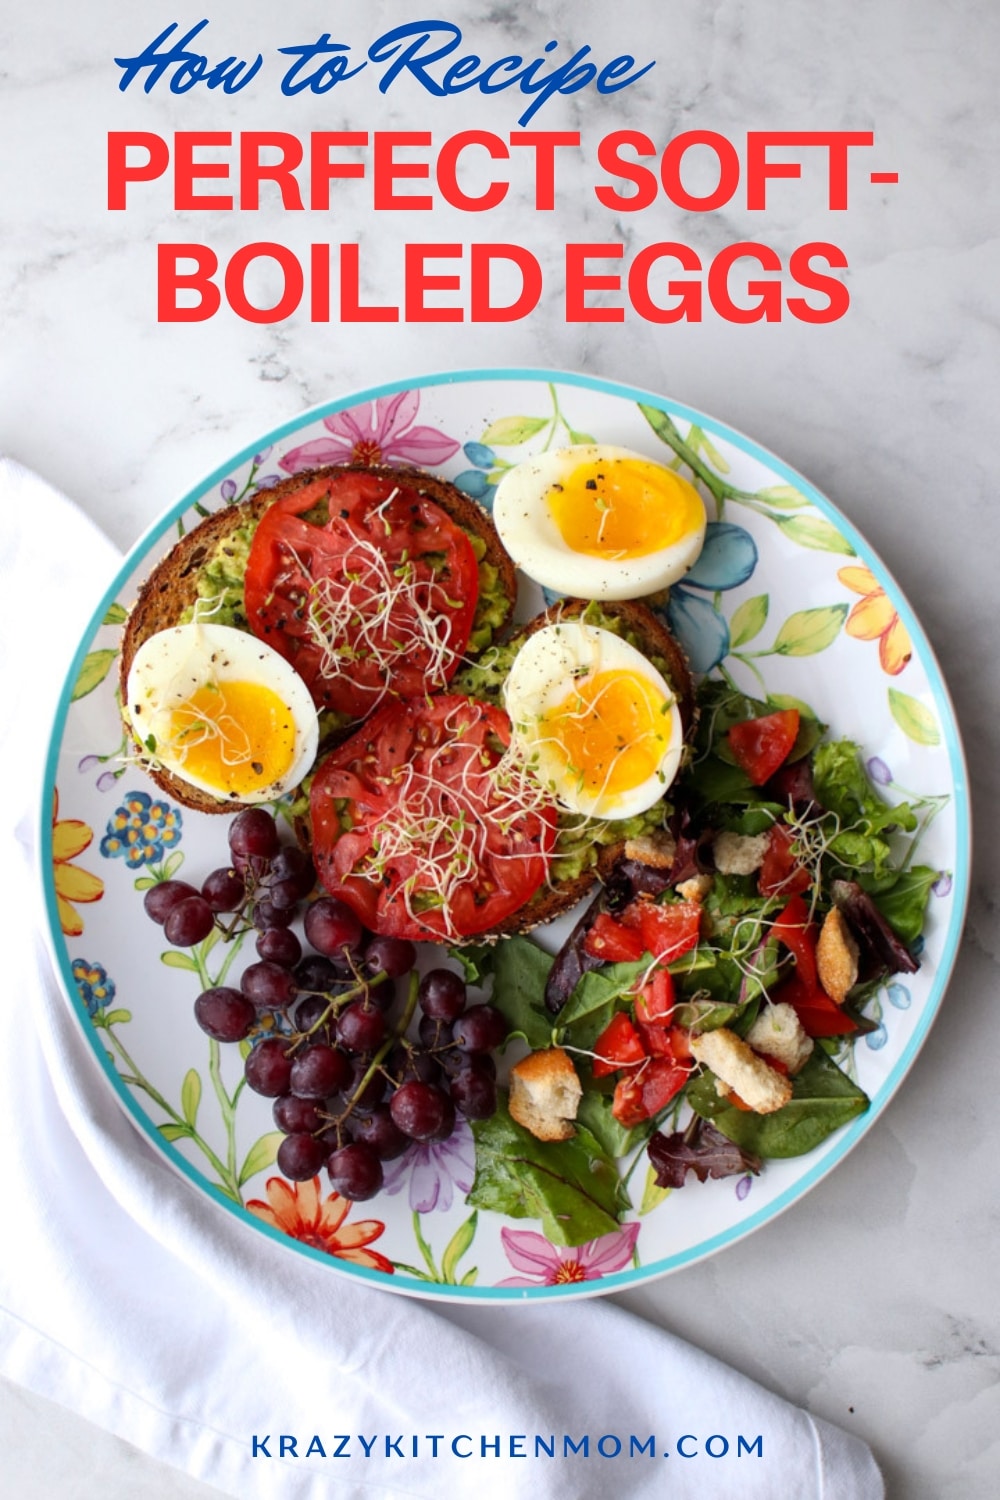 If you're looking for a delicious, protein-packed breakfast to start your day, look no further than the humble soft-boiled egg! With a few simple steps, you can whip up this classic brunch favorite in a matter of minutes.  via @krazykitchenmom